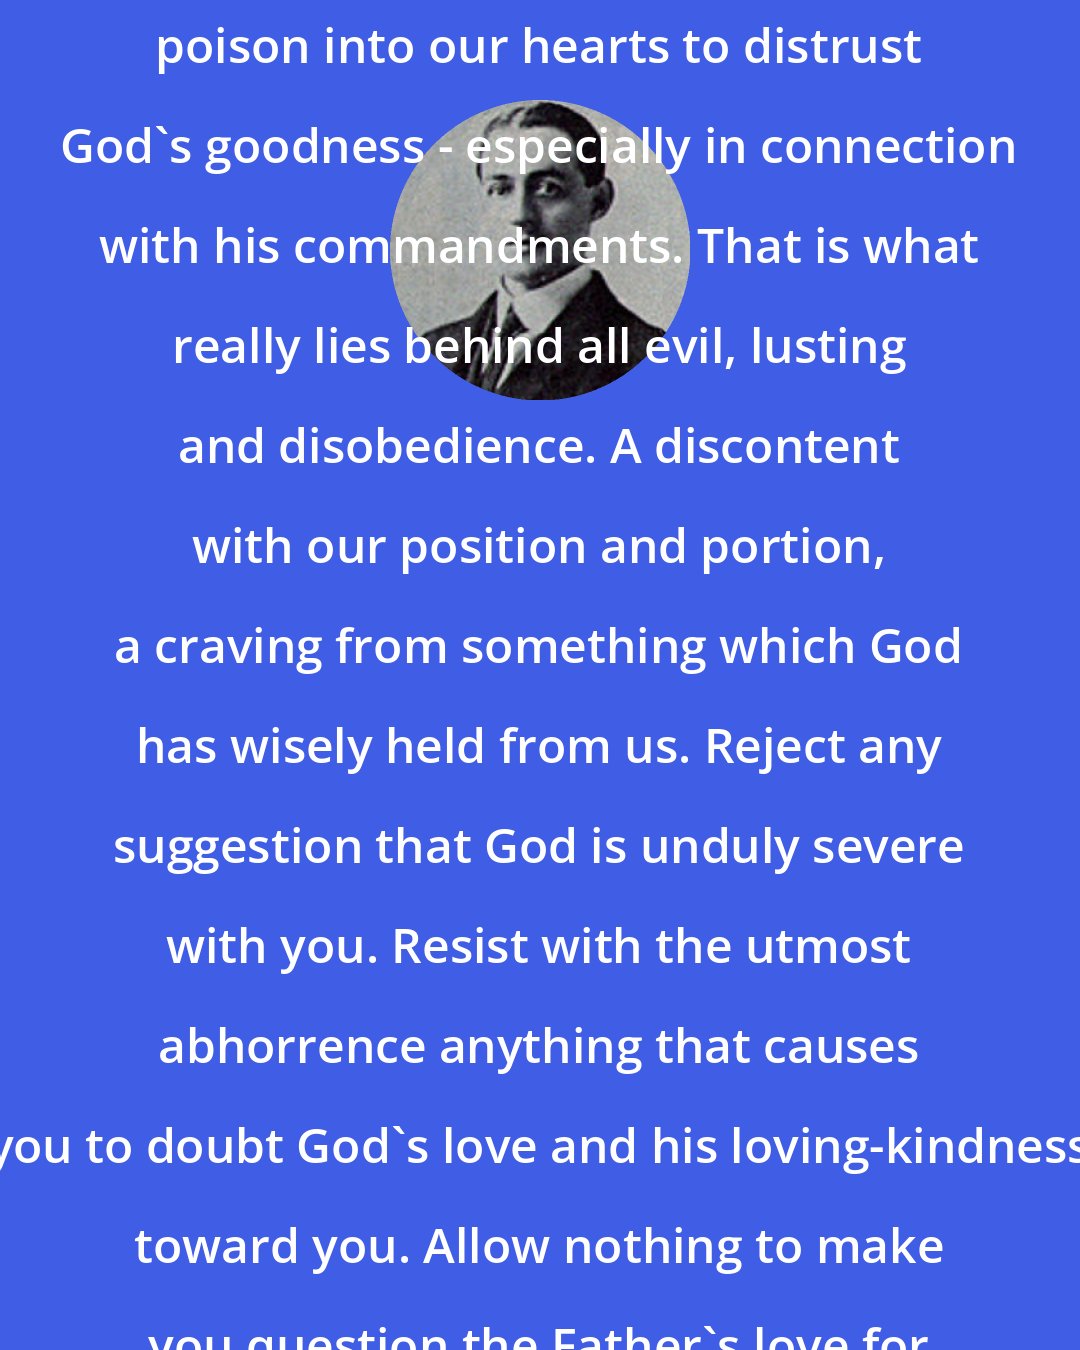 Arthur W. Pink: Satan is ever seeking to inject that poison into our hearts to distrust God's goodness - especially in connection with his commandments. That is what really lies behind all evil, lusting and disobedience. A discontent with our position and portion, a craving from something which God has wisely held from us. Reject any suggestion that God is unduly severe with you. Resist with the utmost abhorrence anything that causes you to doubt God's love and his loving-kindness toward you. Allow nothing to make you question the Father's love for his child.